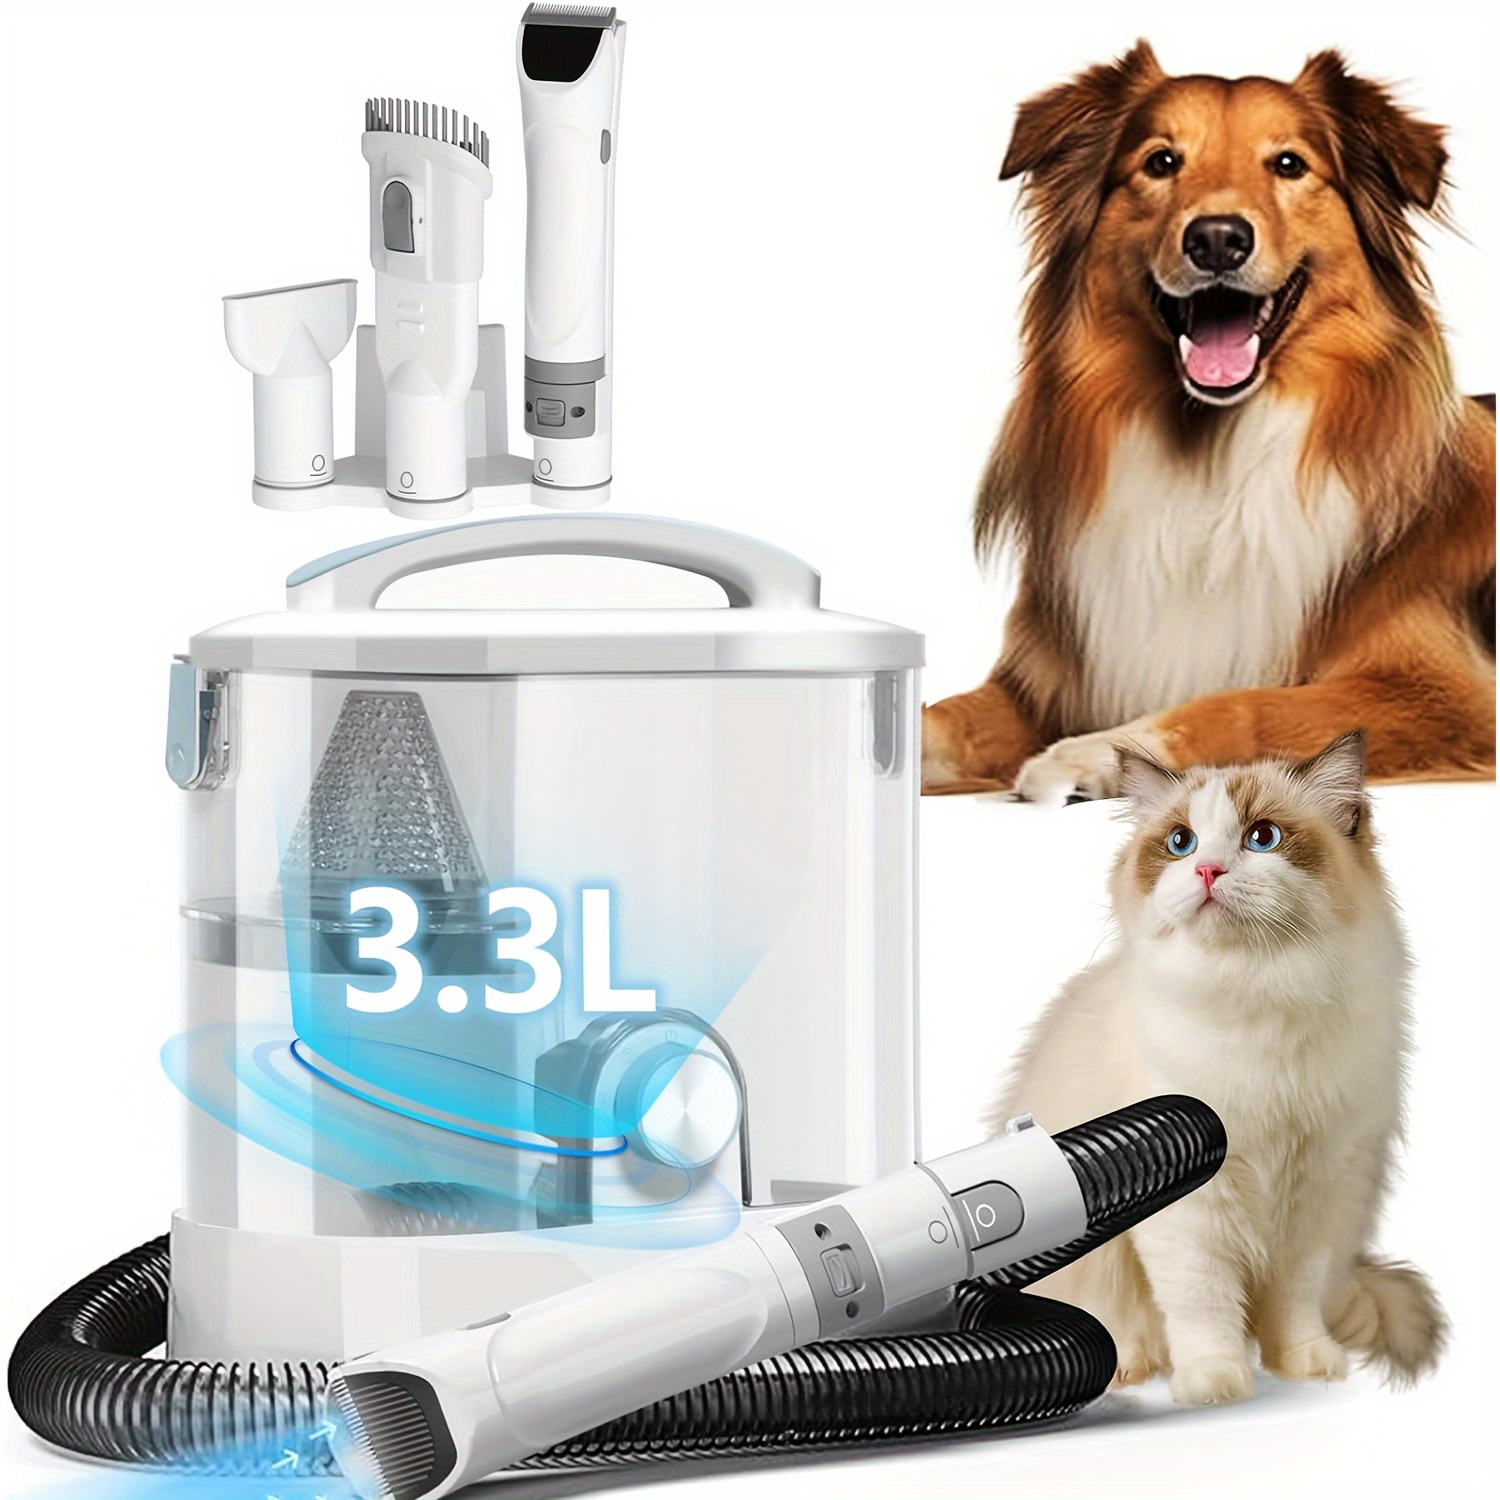 

1set, Pet Hair Vacuum For Shedding Grooming With Dog Clipper - Multipurpose Dog Grooming Kit With 3.3l Large Capacity Dust Box And Dryer Hair, 6 Pieces Grooming Tools For Dogs And Cats ( 4 In 1)